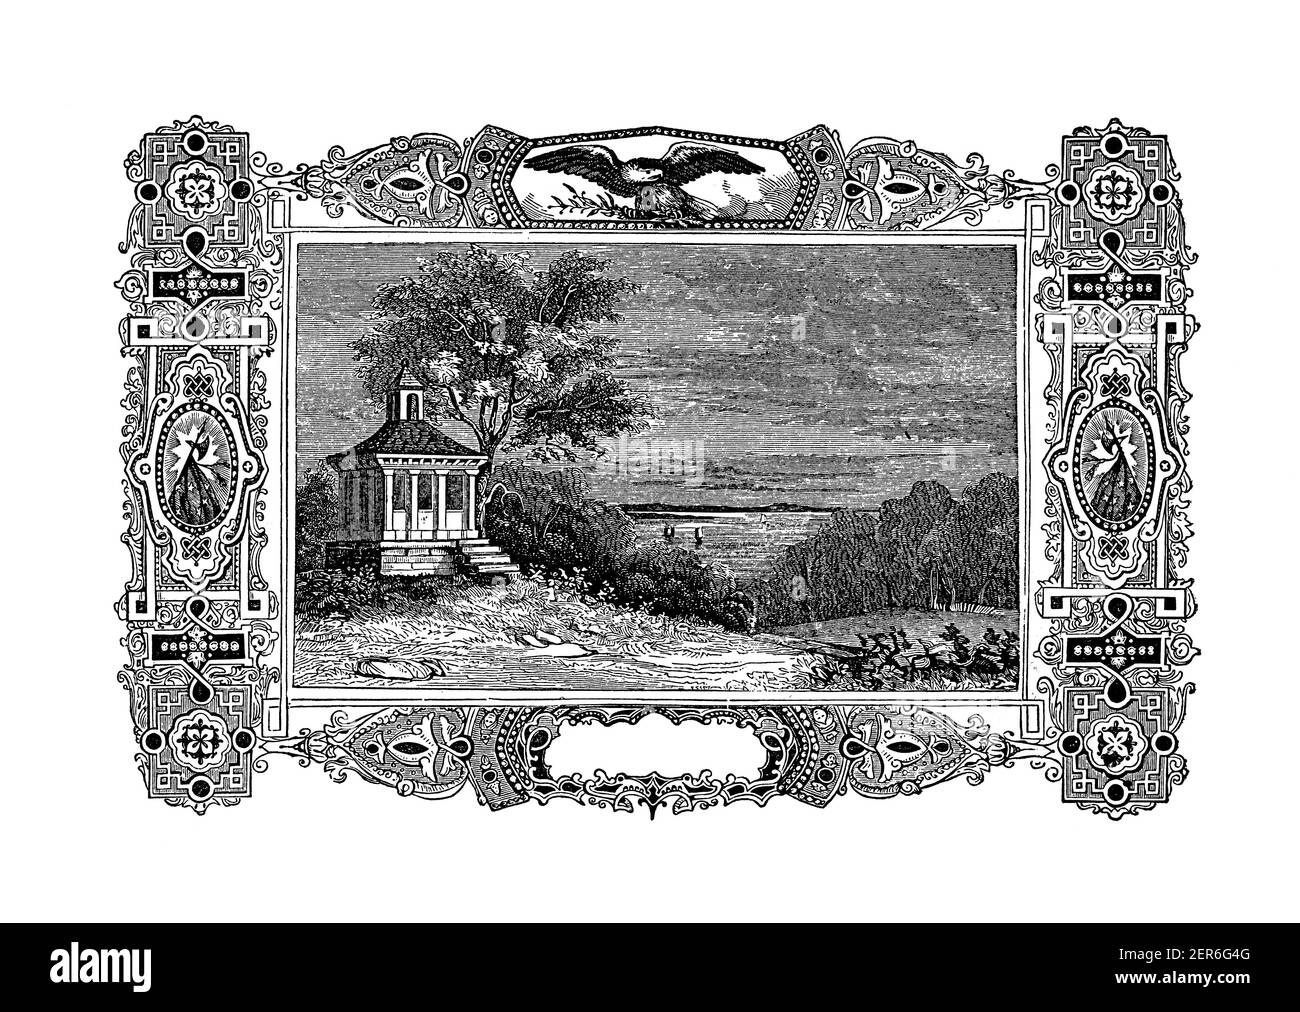 Antique engraving showing George Washington's summer house at Mount Vernon, Virginia. Illustration published in The Pictorial Life of General Washingt Stock Photo